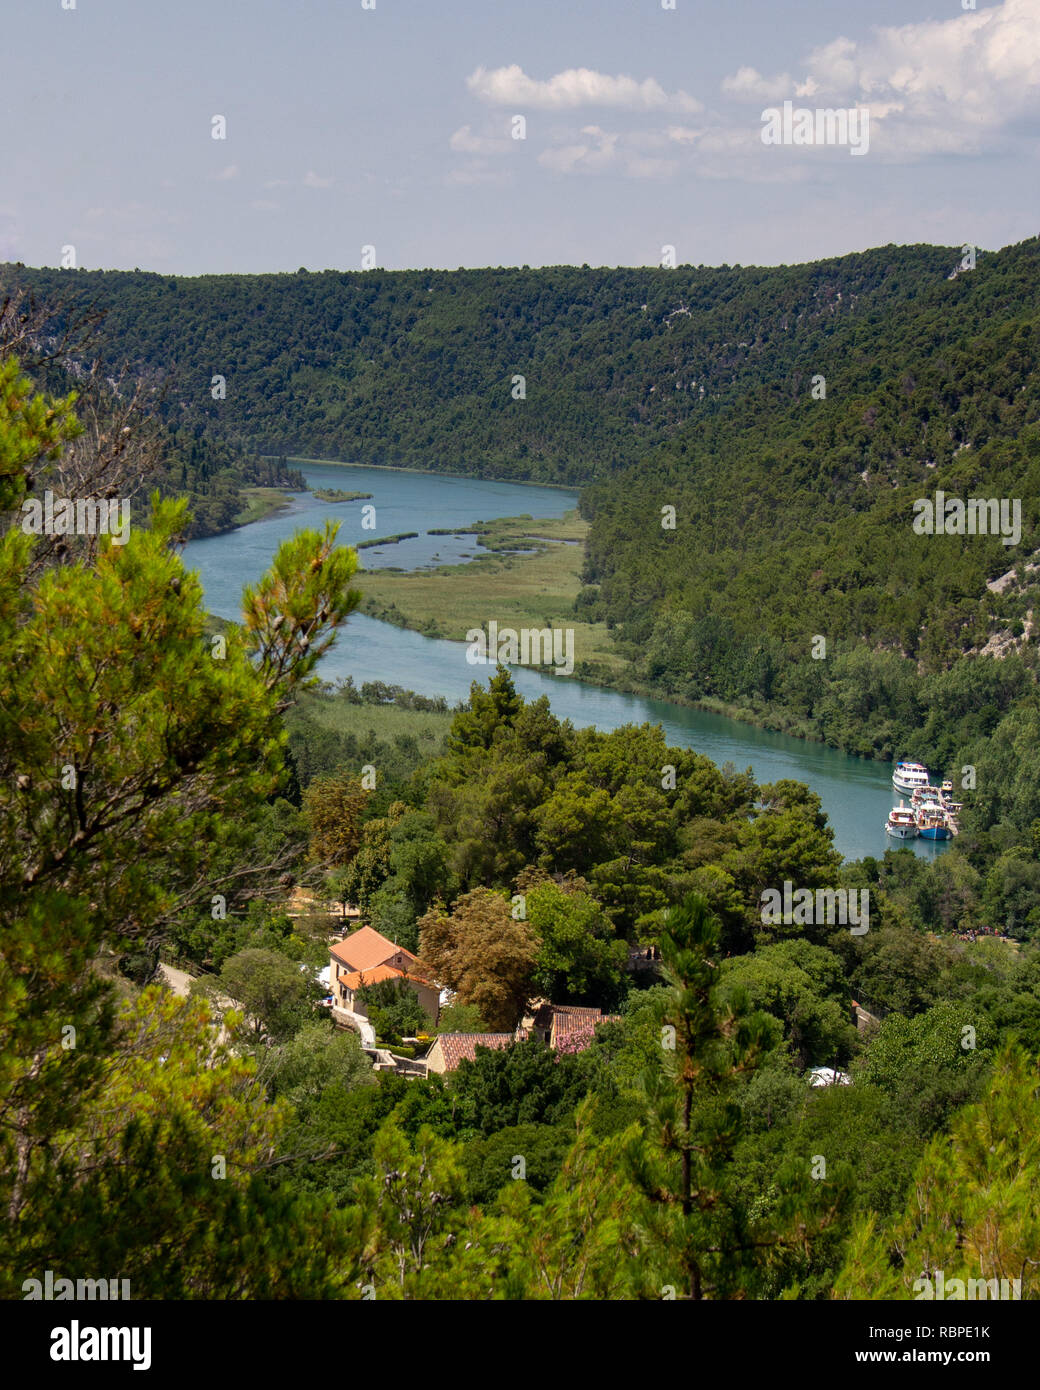 Boats are docked on the Krka River in the Krka National Park in Croatia Stock Photo